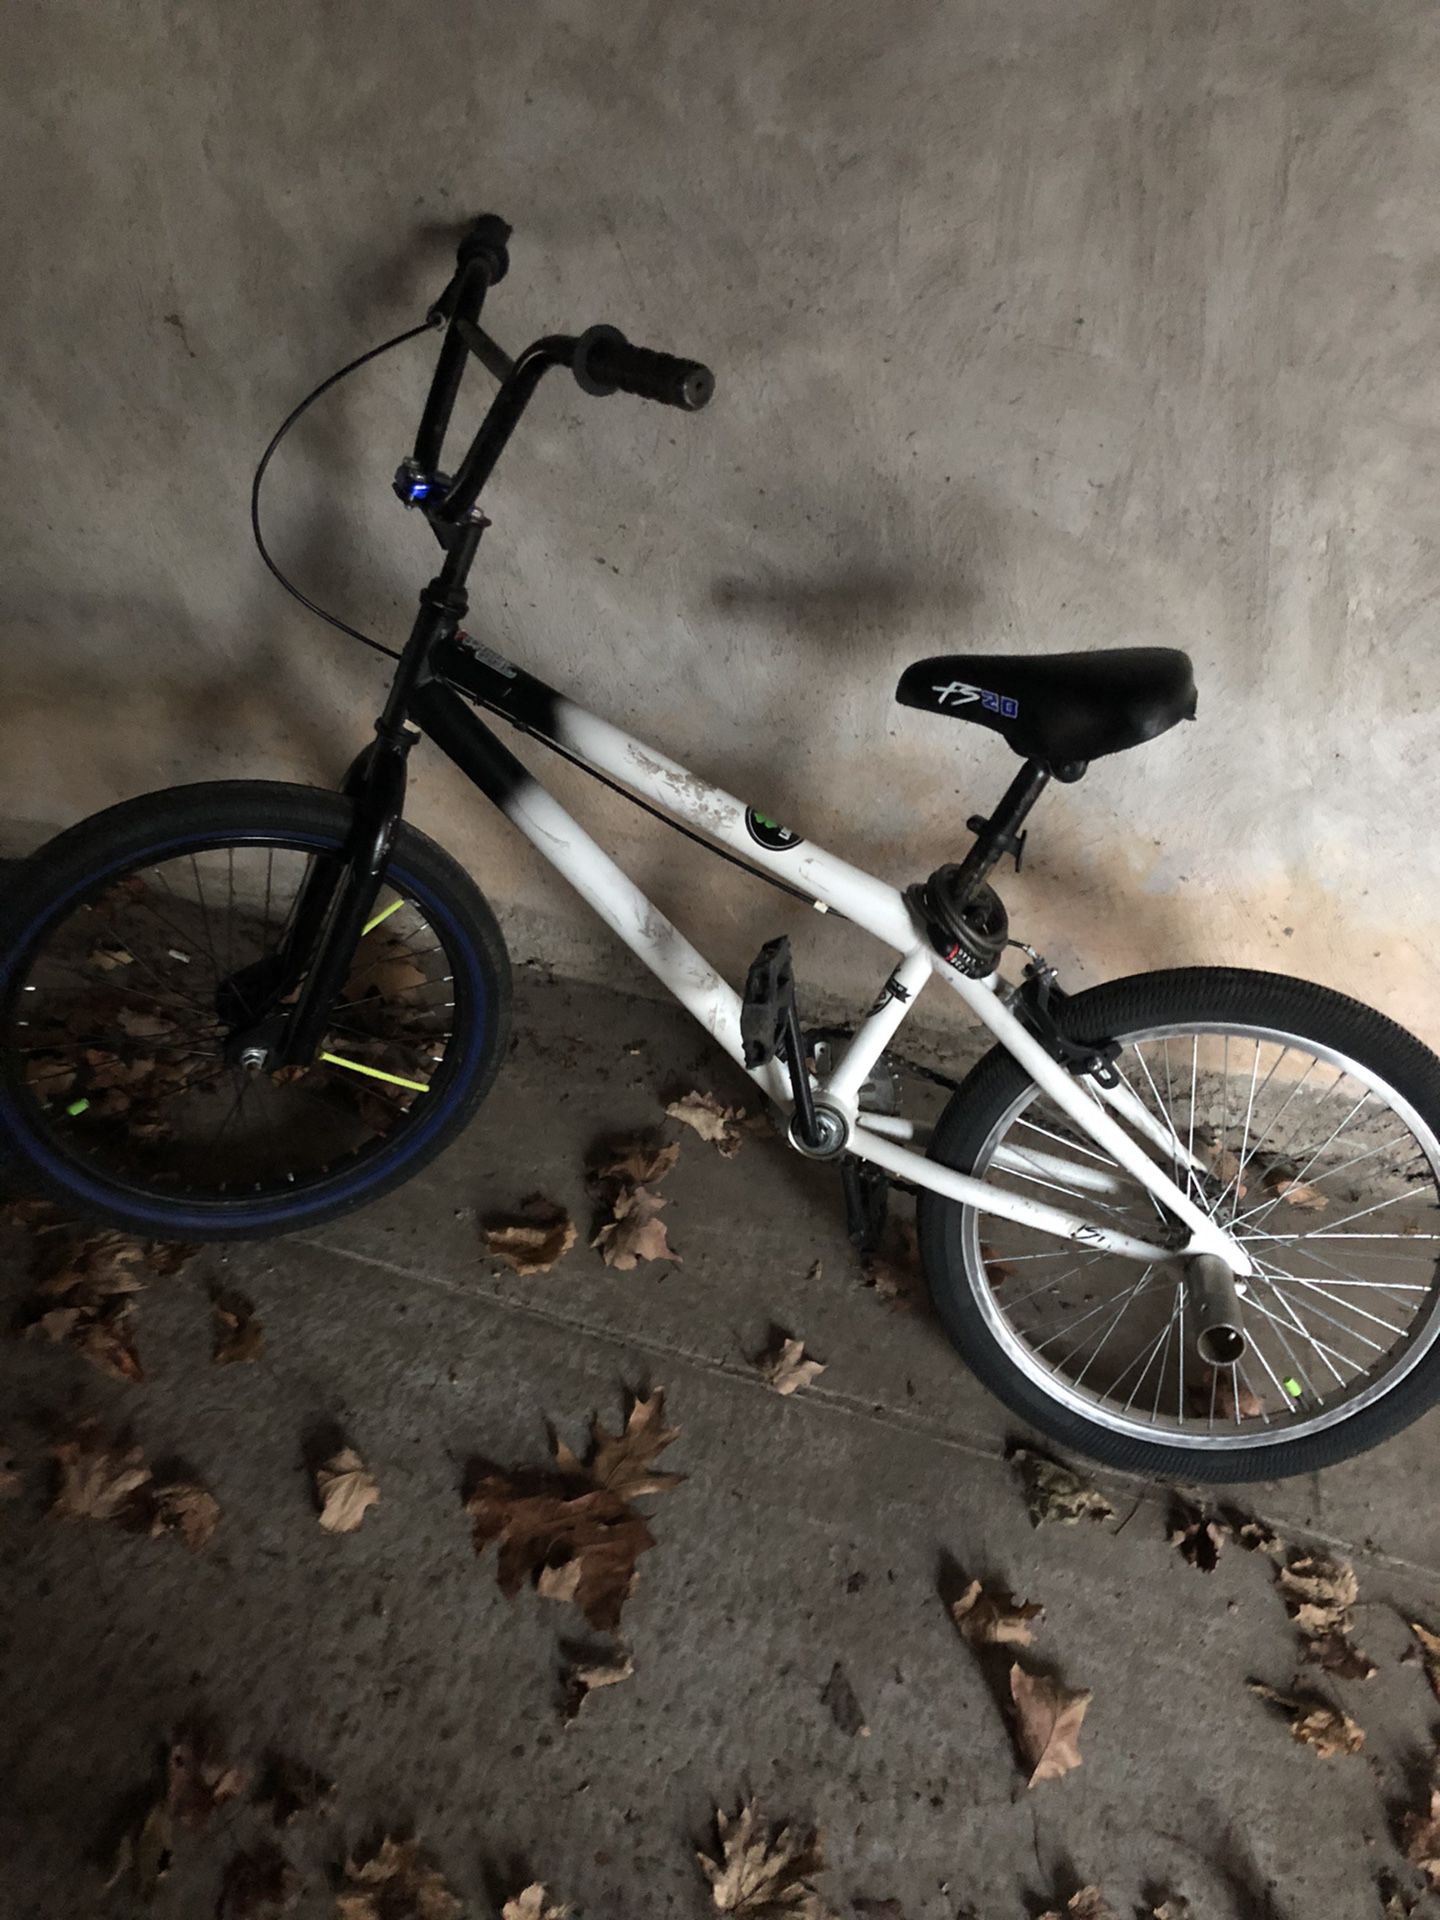 Bmx Bike. I Put A New Tire On It. It Has Breaks. Runs Very Good And Smooth. HMU With Offers Or Give Me Full Price.